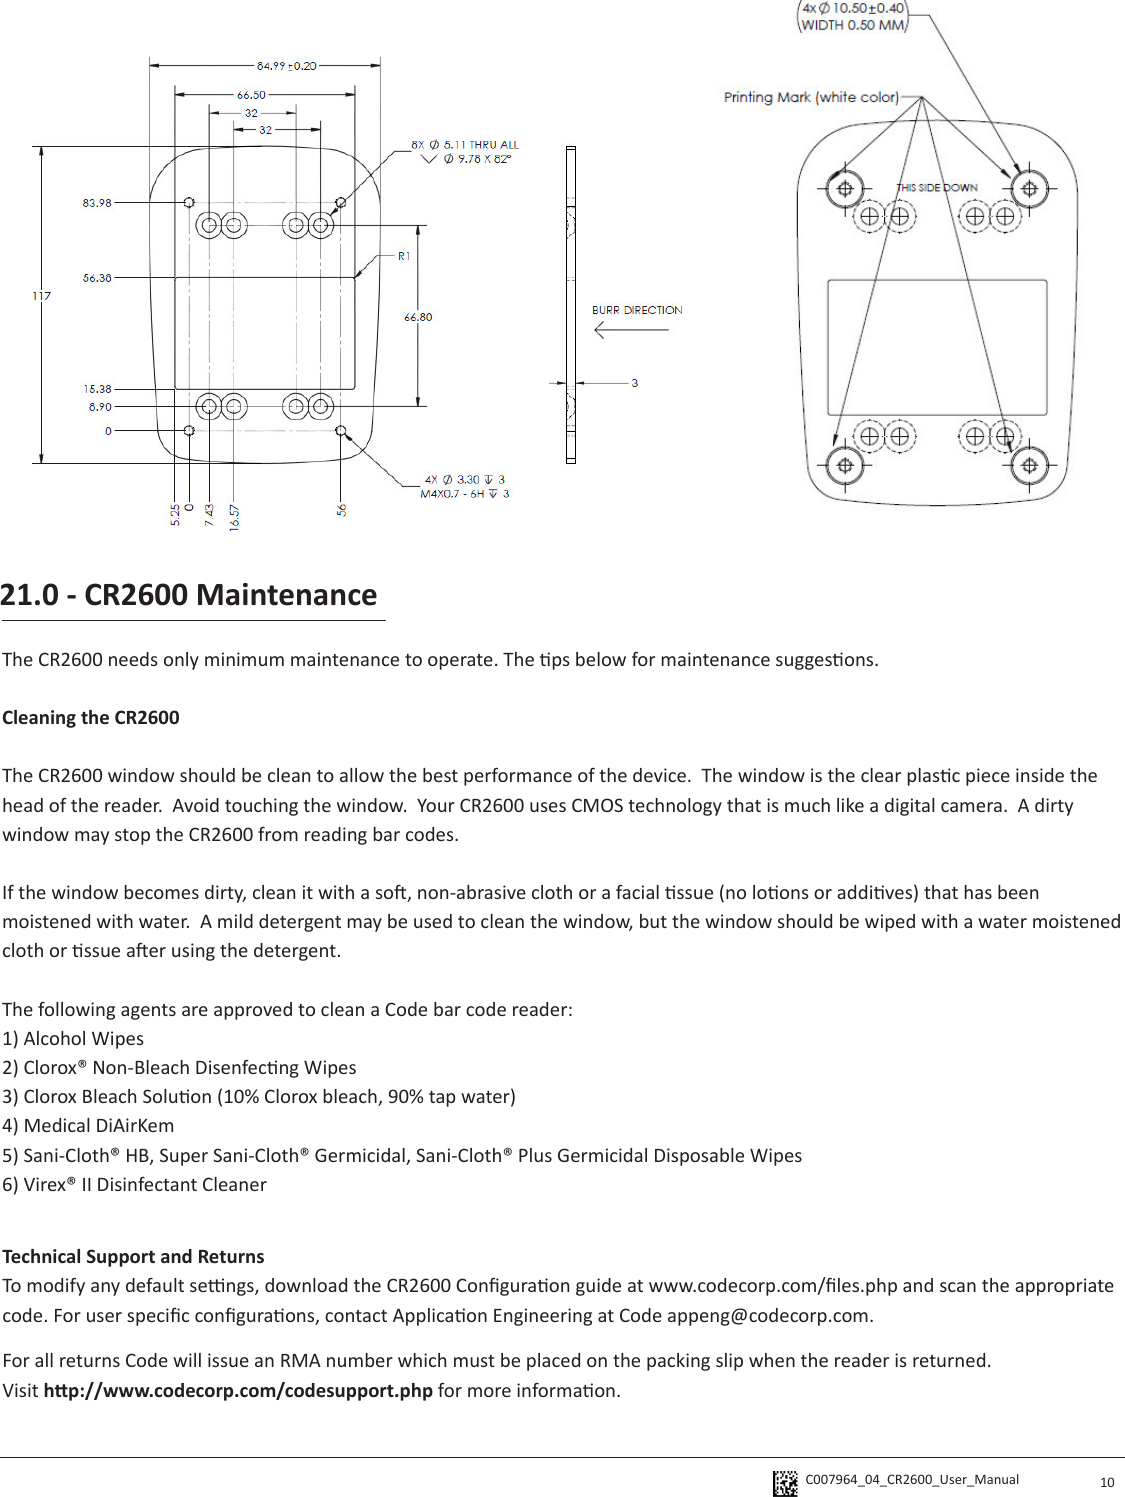 C007964_04_CR2600_User_Manual  10The CR2600 needs only minimum maintenance to operate. The ps below for maintenance suggesons.Cleaning the CR2600 The CR2600 window should be clean to allow the best performance of the device.  The window is the clear plasc piece inside the head of the reader.  Avoid touching the window.  Your CR2600 uses CMOS technology that is much like a digital camera.  A dirty window may stop the CR2600 from reading bar codes.  If the window becomes dirty, clean it with a so, non-abrasive cloth or a facial ssue (no loons or addives) that has been moistened with water.  A mild detergent may be used to clean the window, but the window should be wiped with a water moistened cloth or ssue aer using the detergent.The following agents are approved to clean a Code bar code reader:1) Alcohol Wipes2) Clorox® Non-Bleach Disenfecng Wipes3) Clorox Bleach Soluon (10% Clorox bleach, 90% tap water)4) Medical DiAirKem5) Sani-Cloth® HB, Super Sani-Cloth® Germicidal, Sani-Cloth® Plus Germicidal Disposable Wipes6) Virex® II Disinfectant Cleaner21.0 - CR2600 MaintenanceTechnical Support and ReturnsTo modify any default sengs, download the CR2600 Conguraon guide at www.codecorp.com/les.php and scan the appropriate code. For user specic conguraons, contact Applicaon Engineering at Code appeng@codecorp.com.For all returns Code will issue an RMA number which must be placed on the packing slip when the reader is returned.  Visit hp://www.codecorp.com/codesupport.php for more informaon.